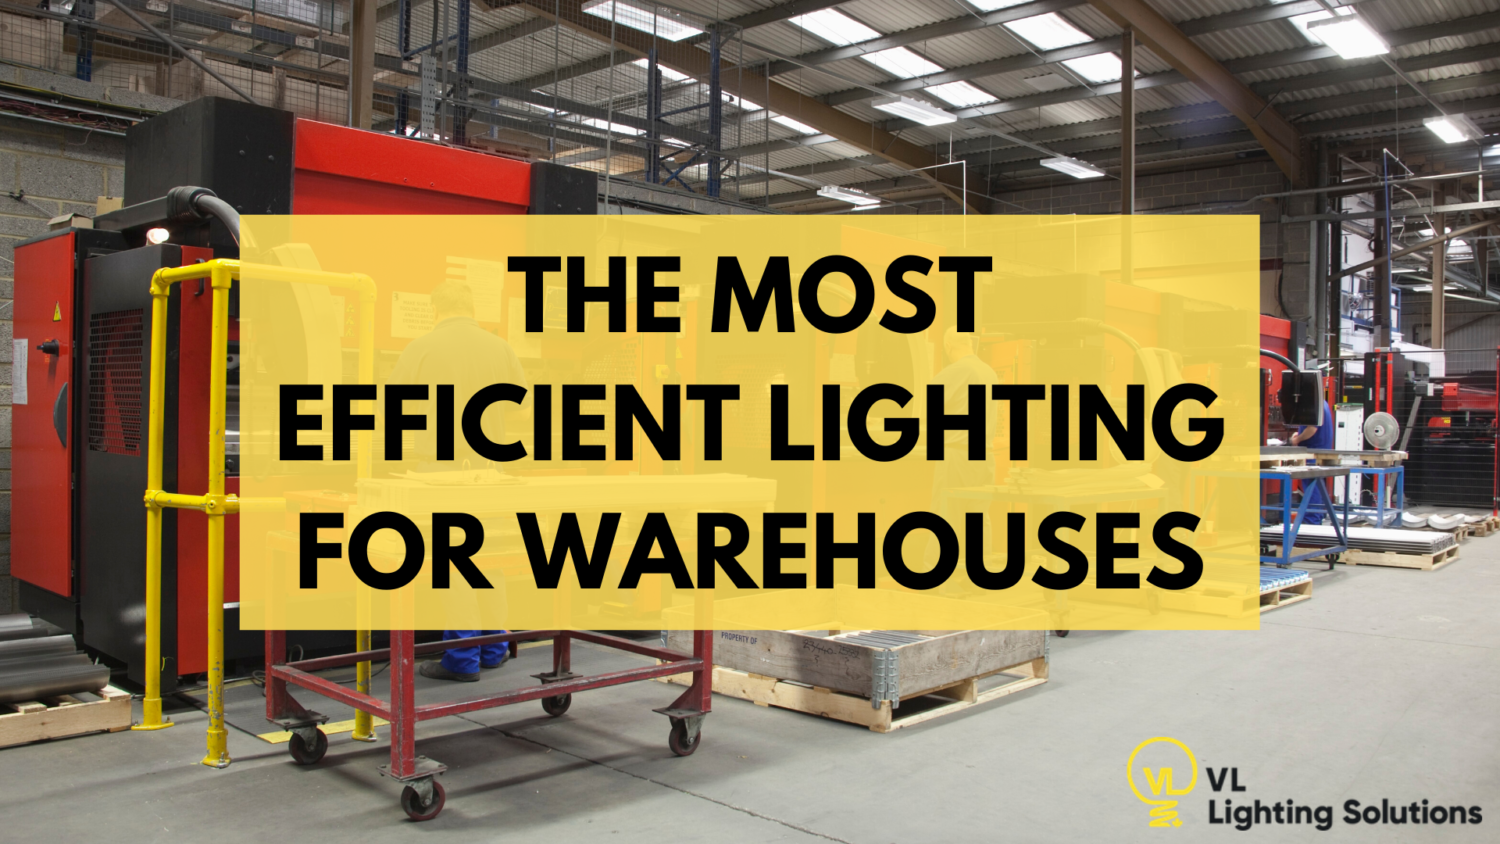 The Most Efficient Lighting for Warehouses